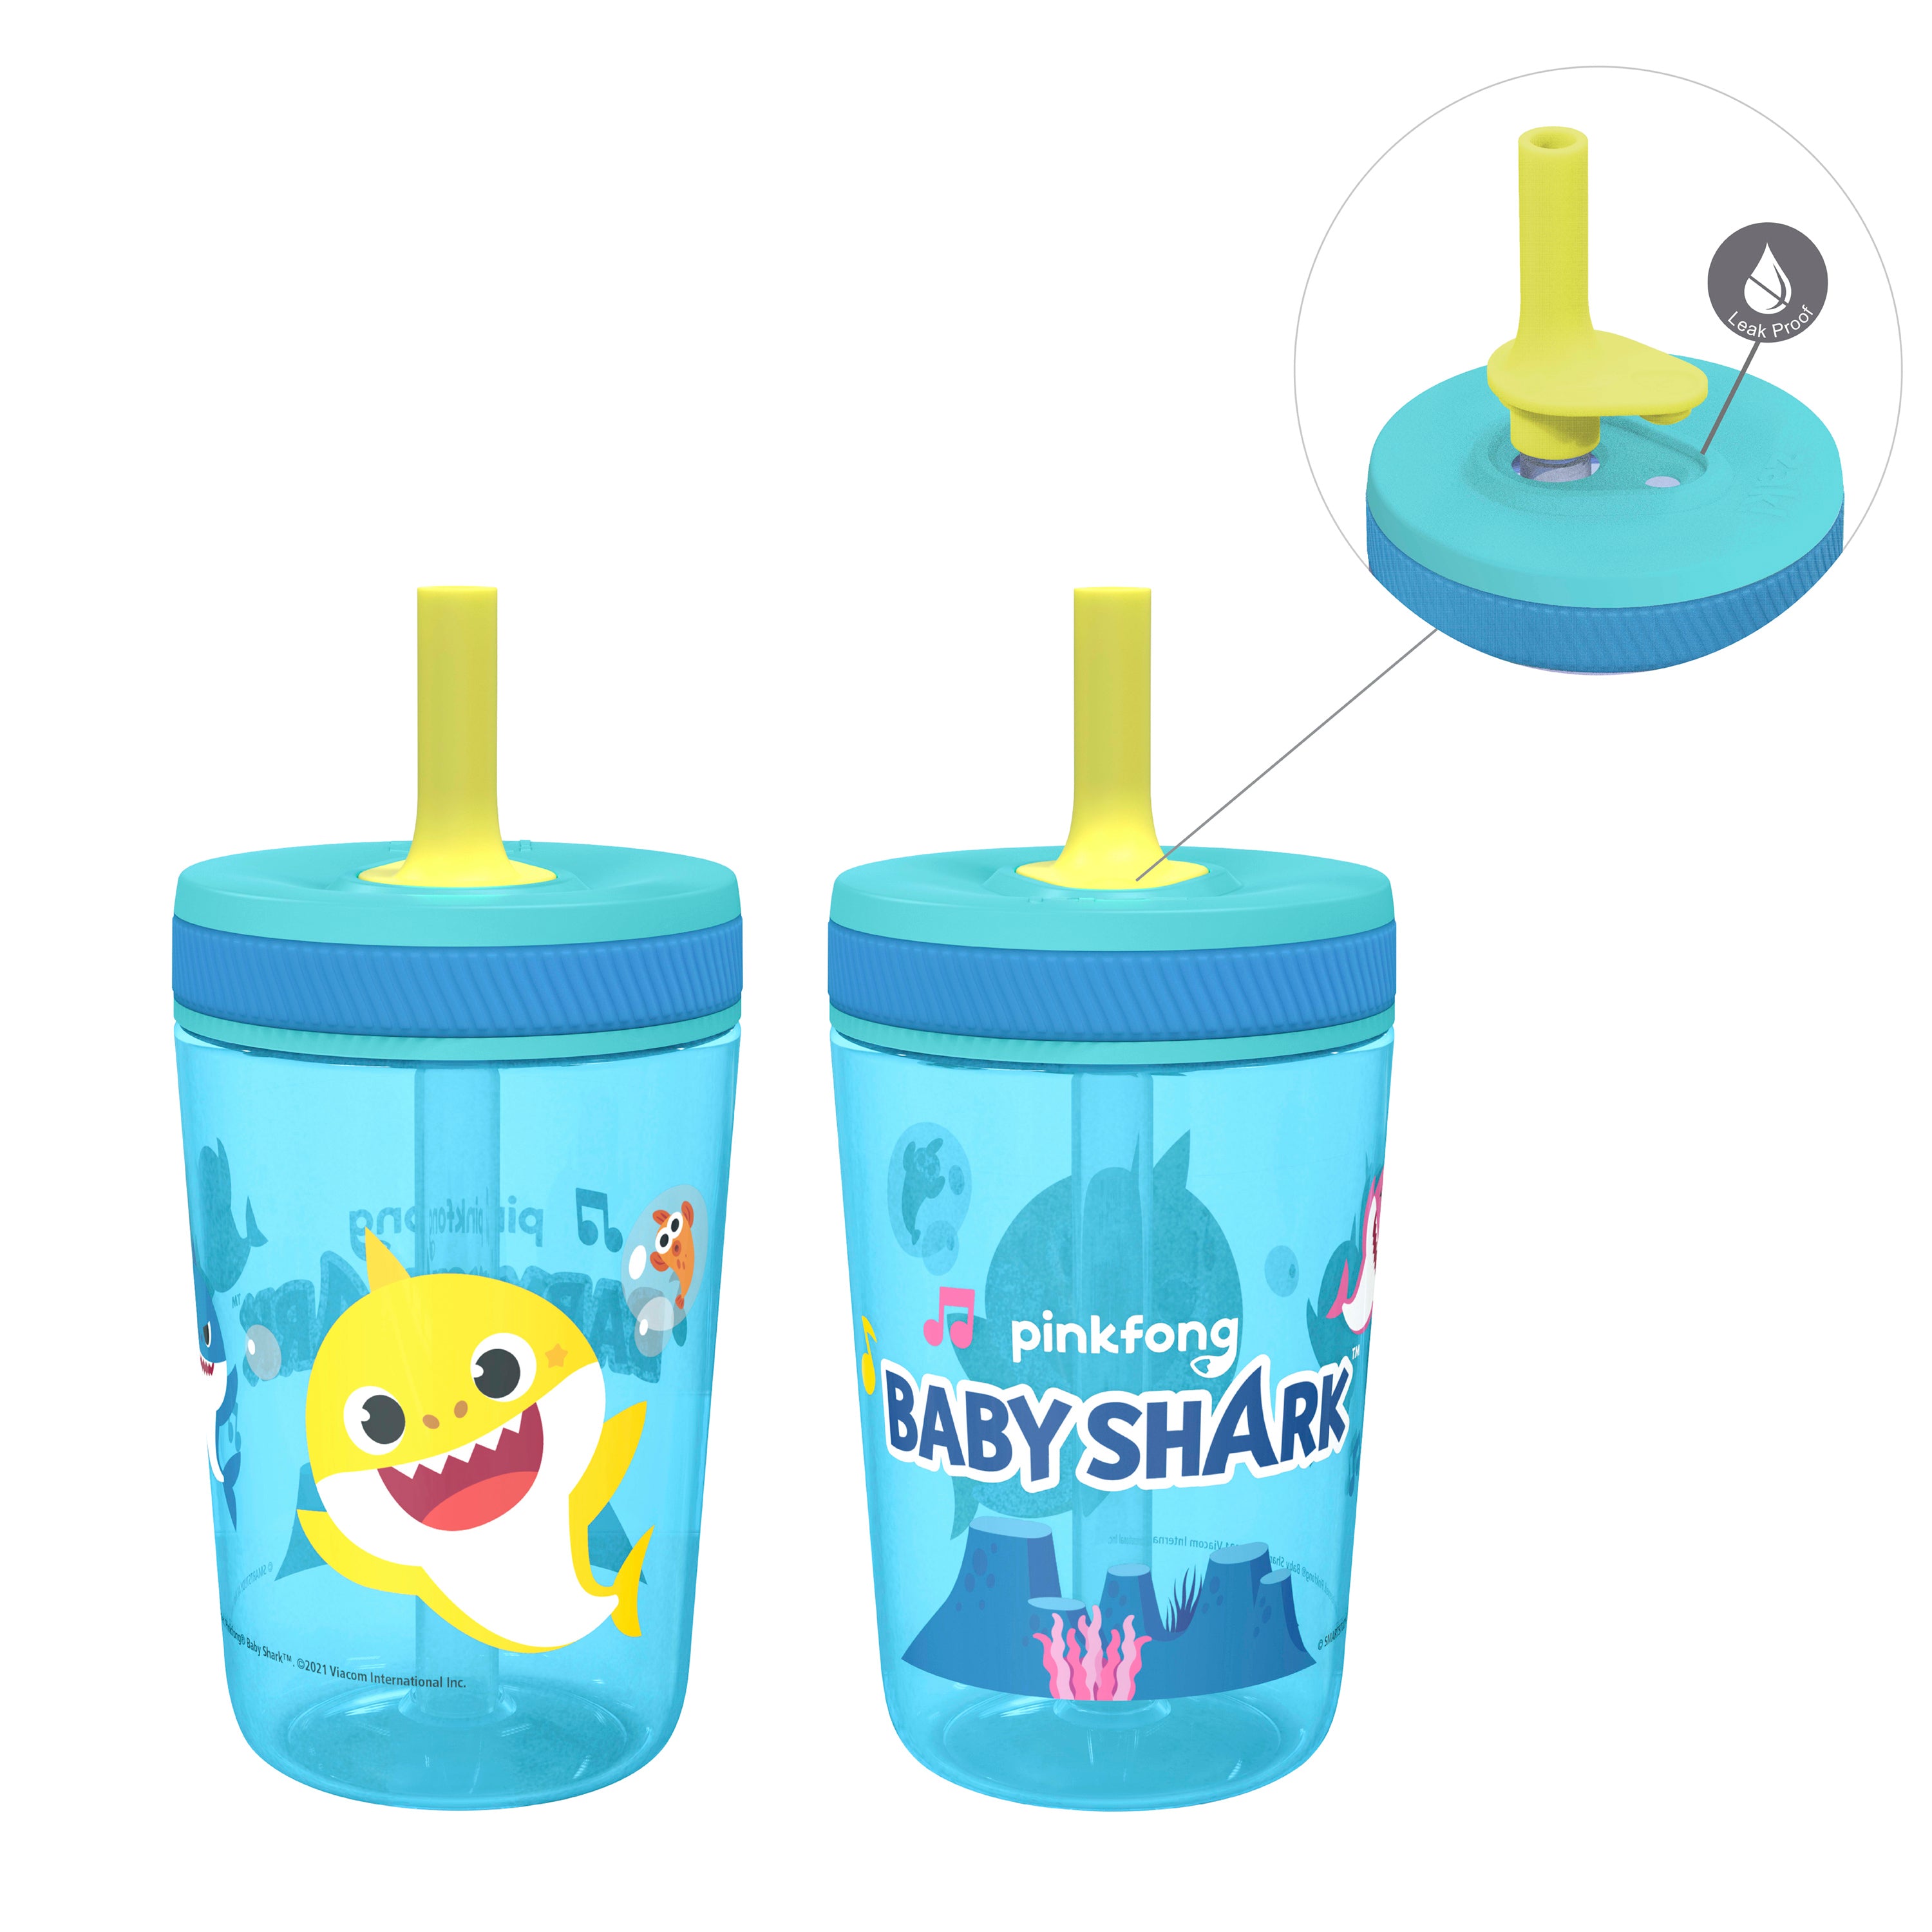 Zak Designs 15 oz Travel Straw Tumbler Plastic and Silicone with Leak-Proof Straw Valve for Kids, 2-Pack Baby Shark, Size: 15 fl oz, Blue